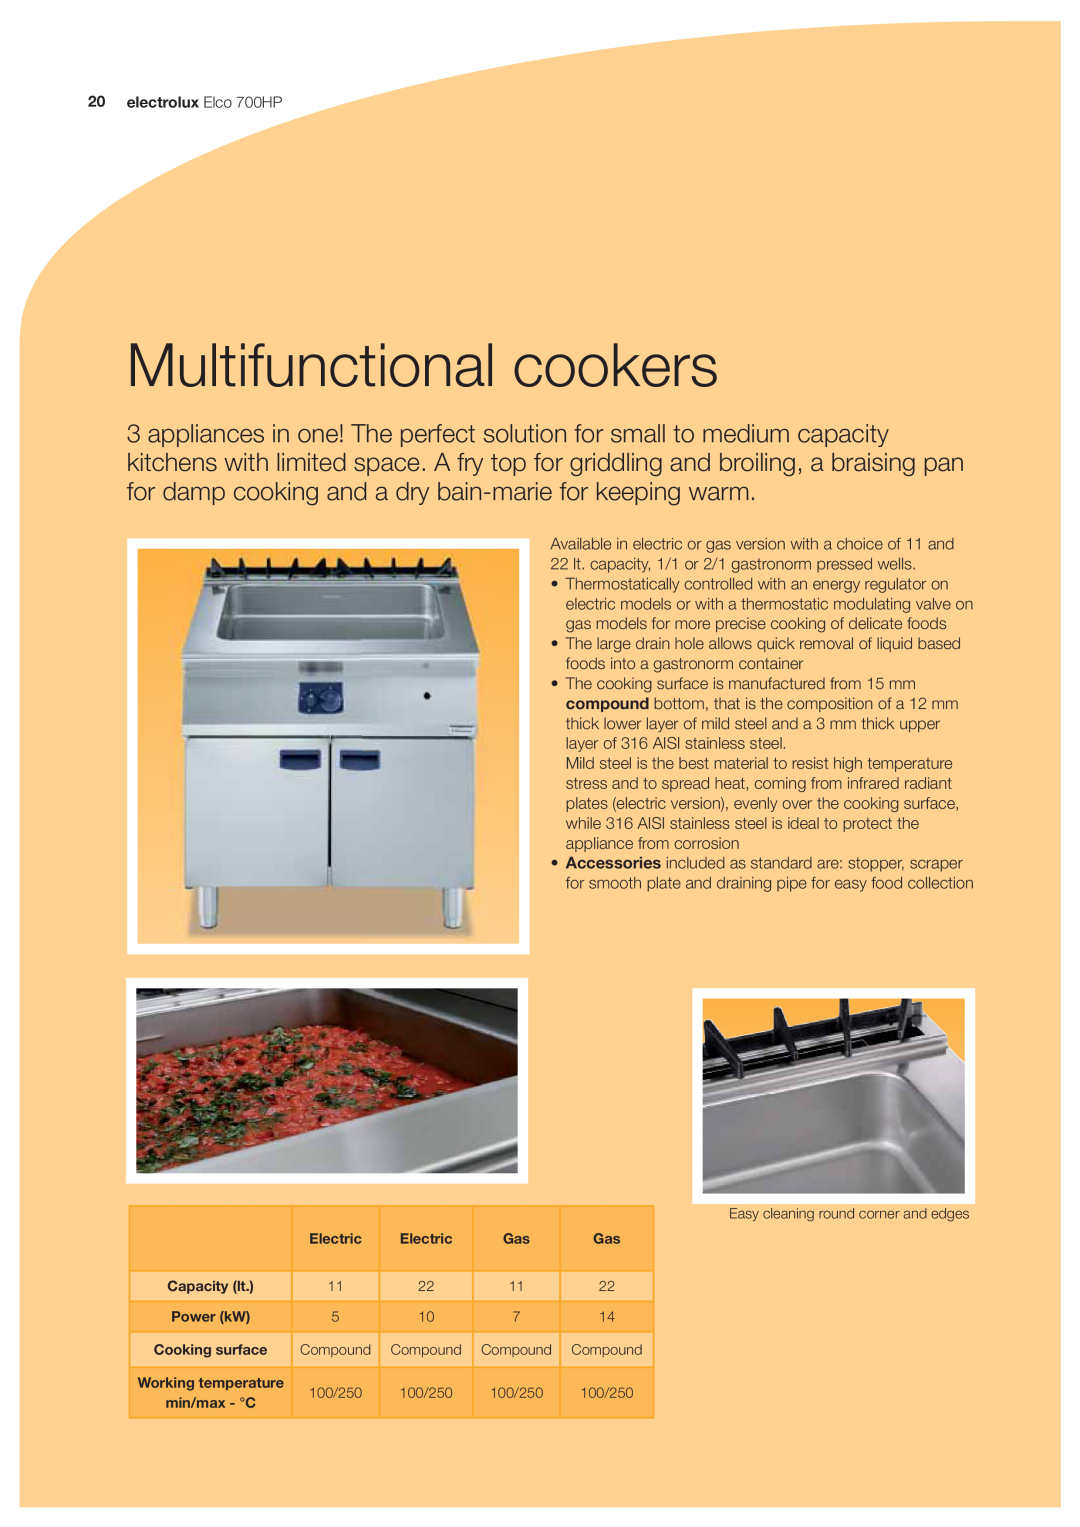 Electrolux manual Multifunctional cookers, electrolux Elco 700HP, Electric 